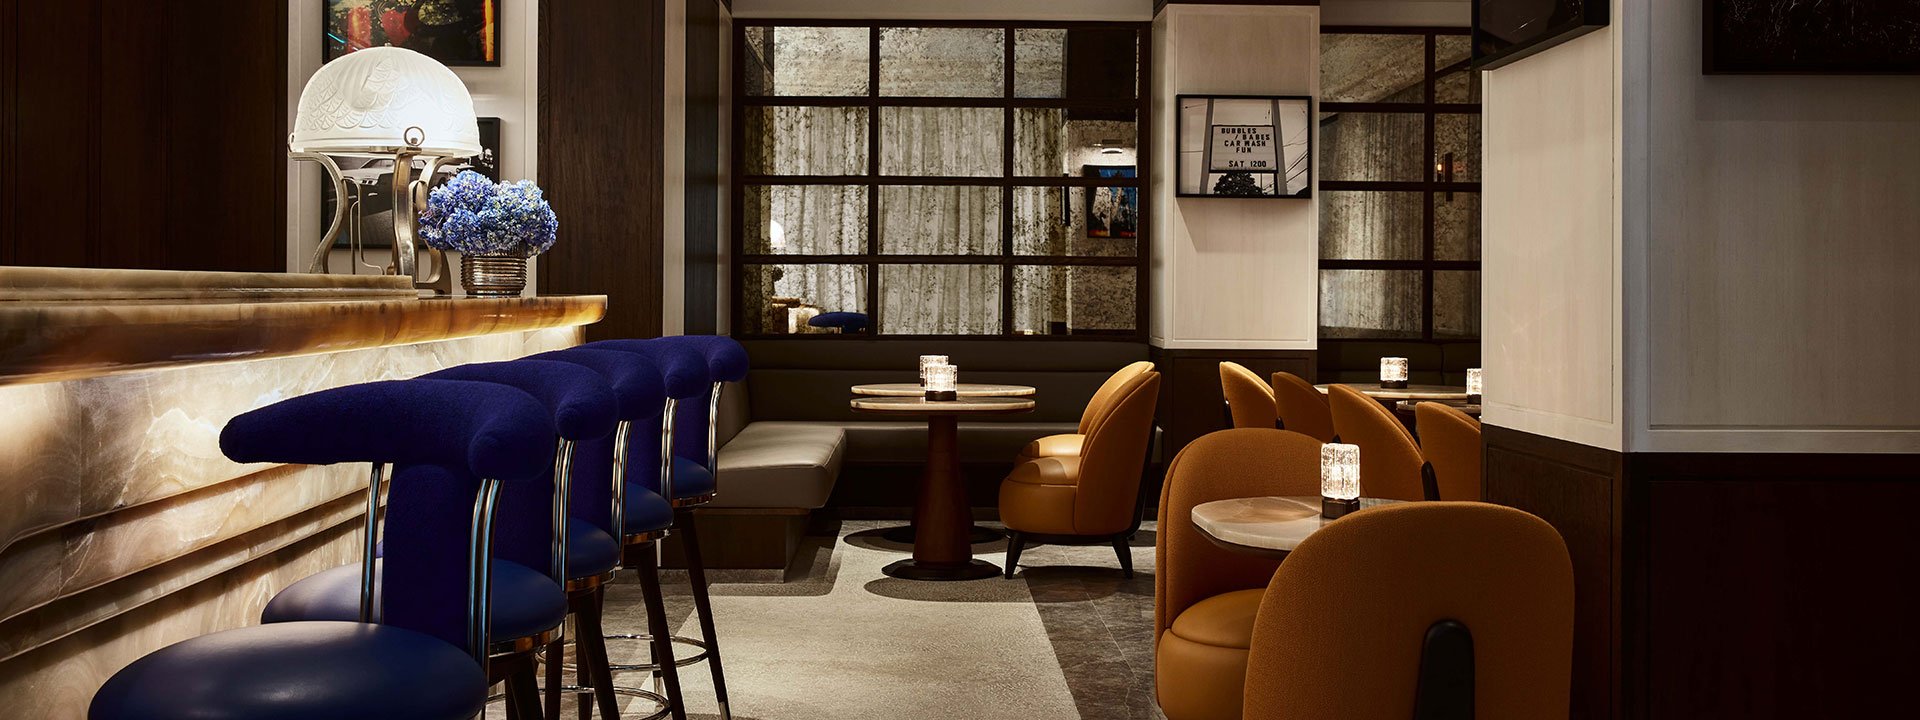 The seating area of The Maybourne Bar. On the left, there are 5 dark blue stools at the bar